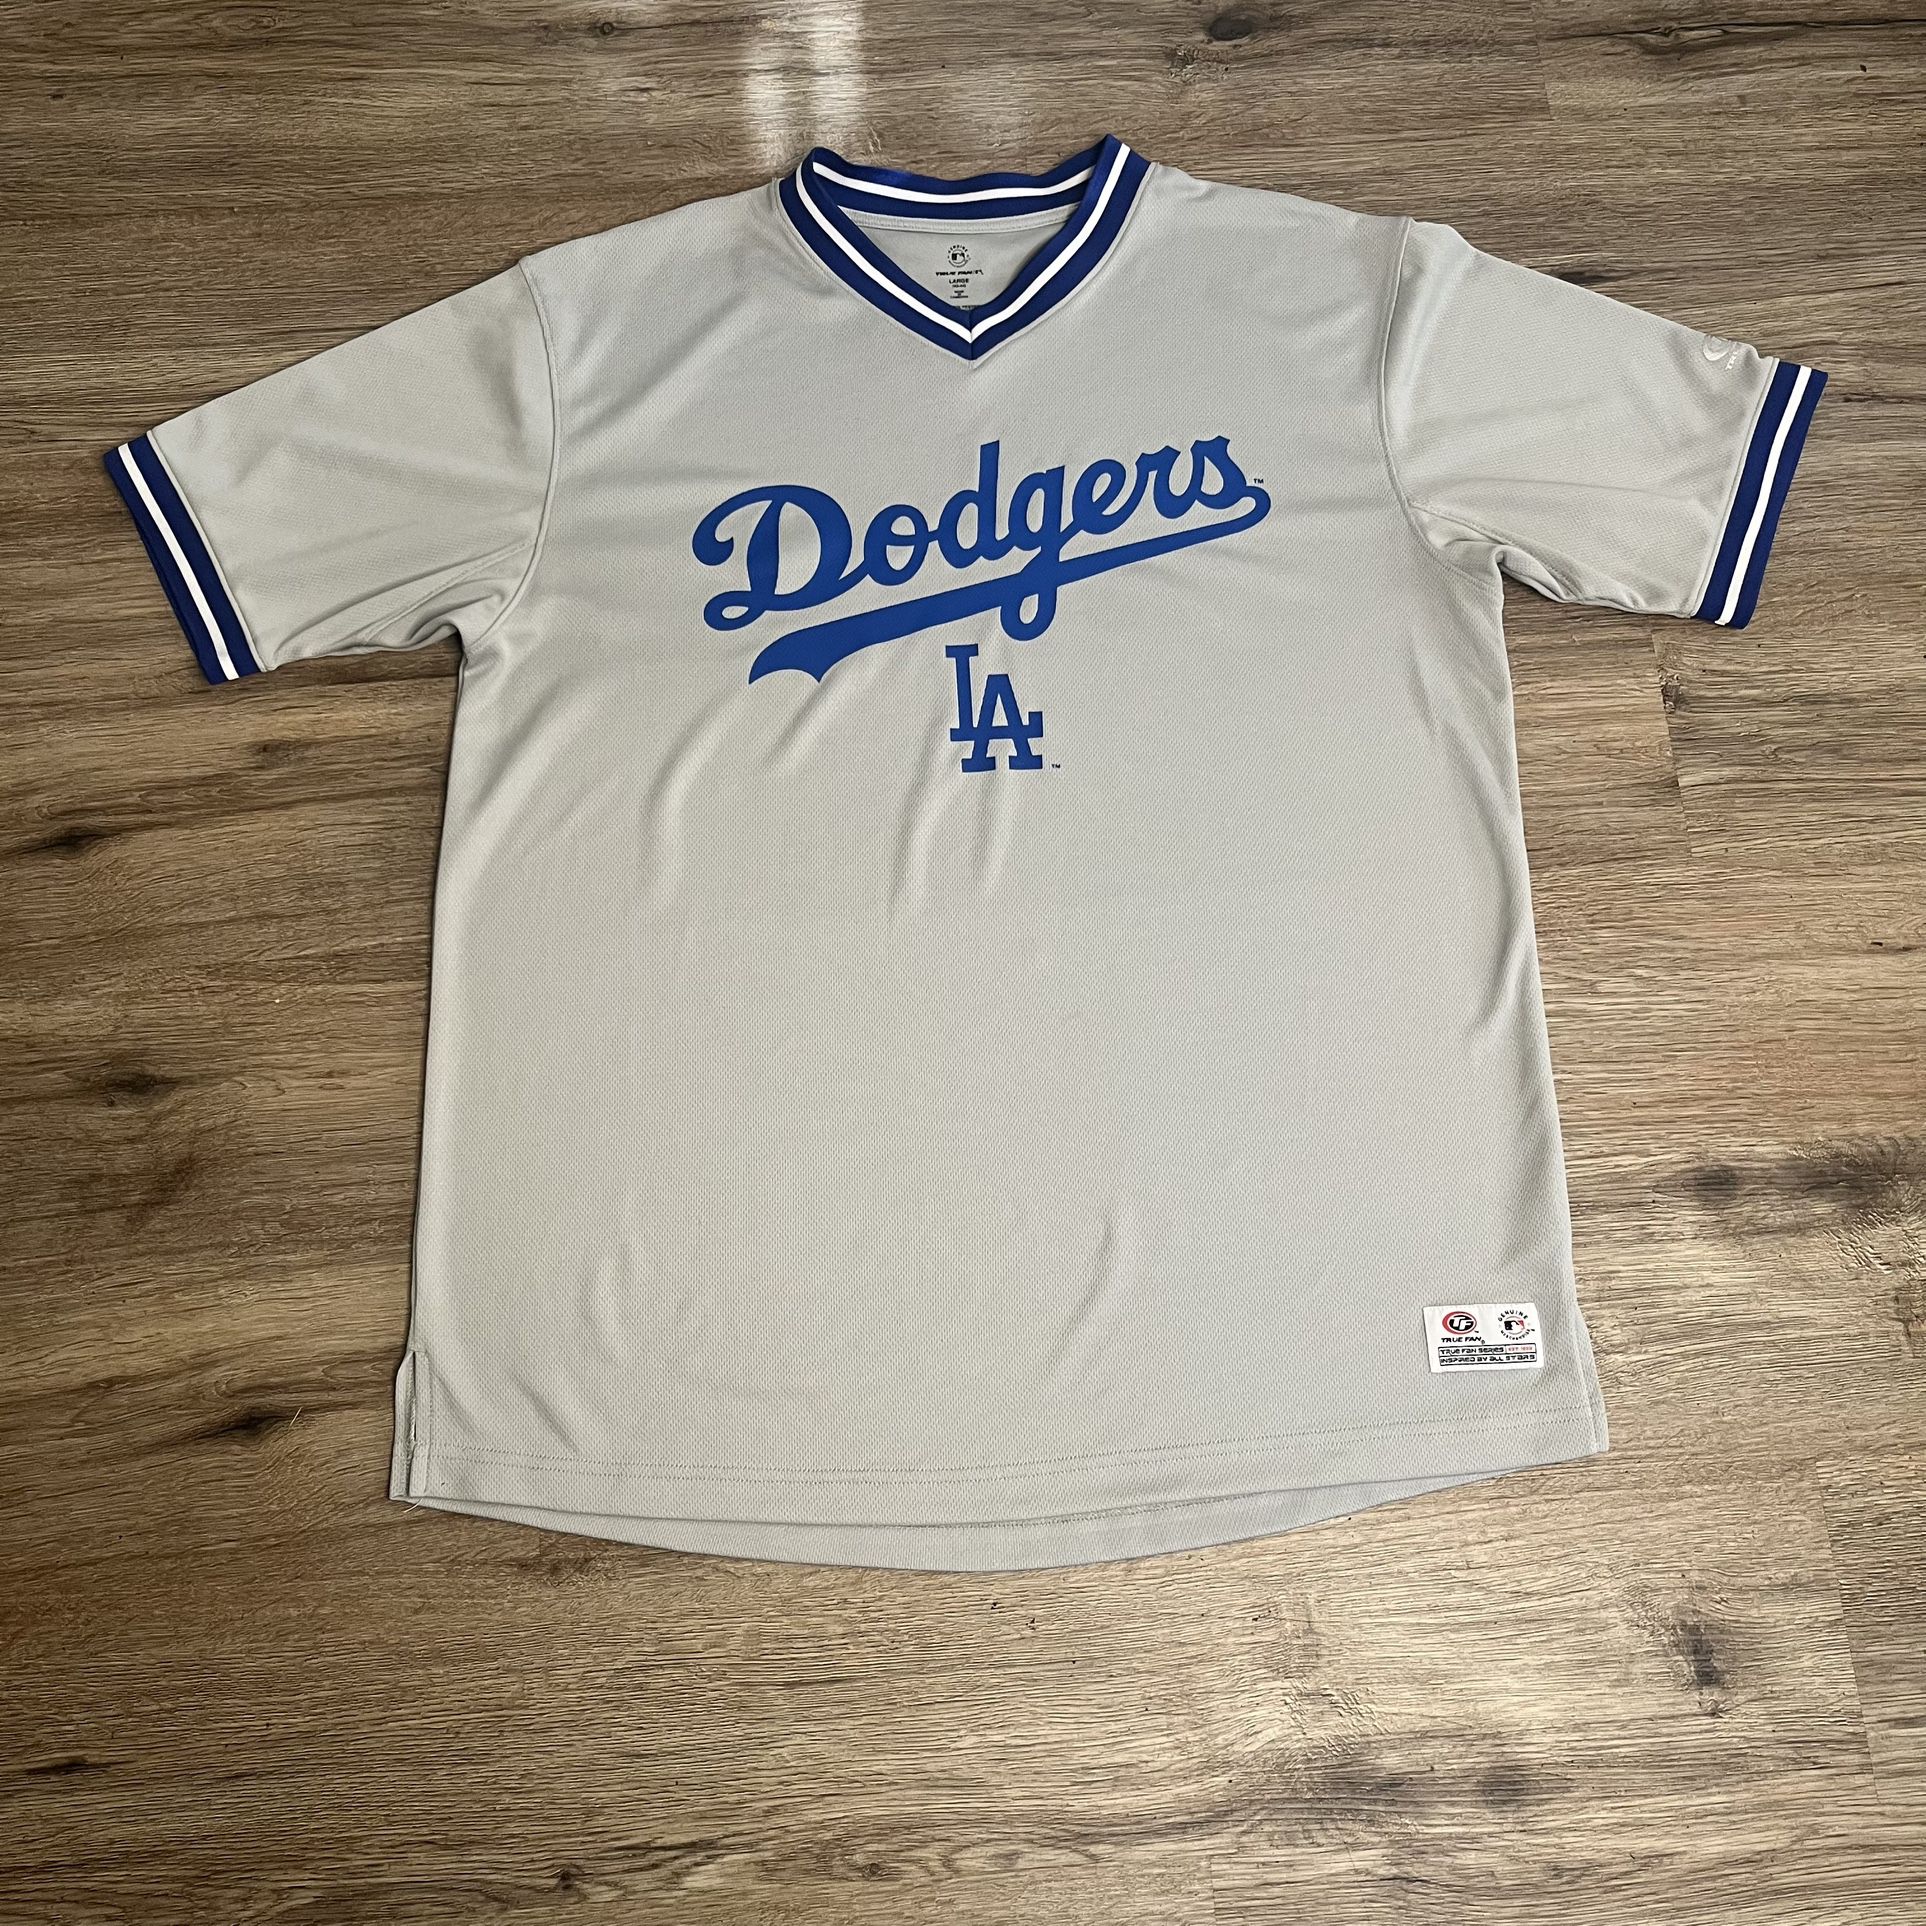 Dodgers Jersey V-neck MLB Baseball Mens Size Large Gray/Blue 100% Polyester  for Sale in Chino, CA - OfferUp